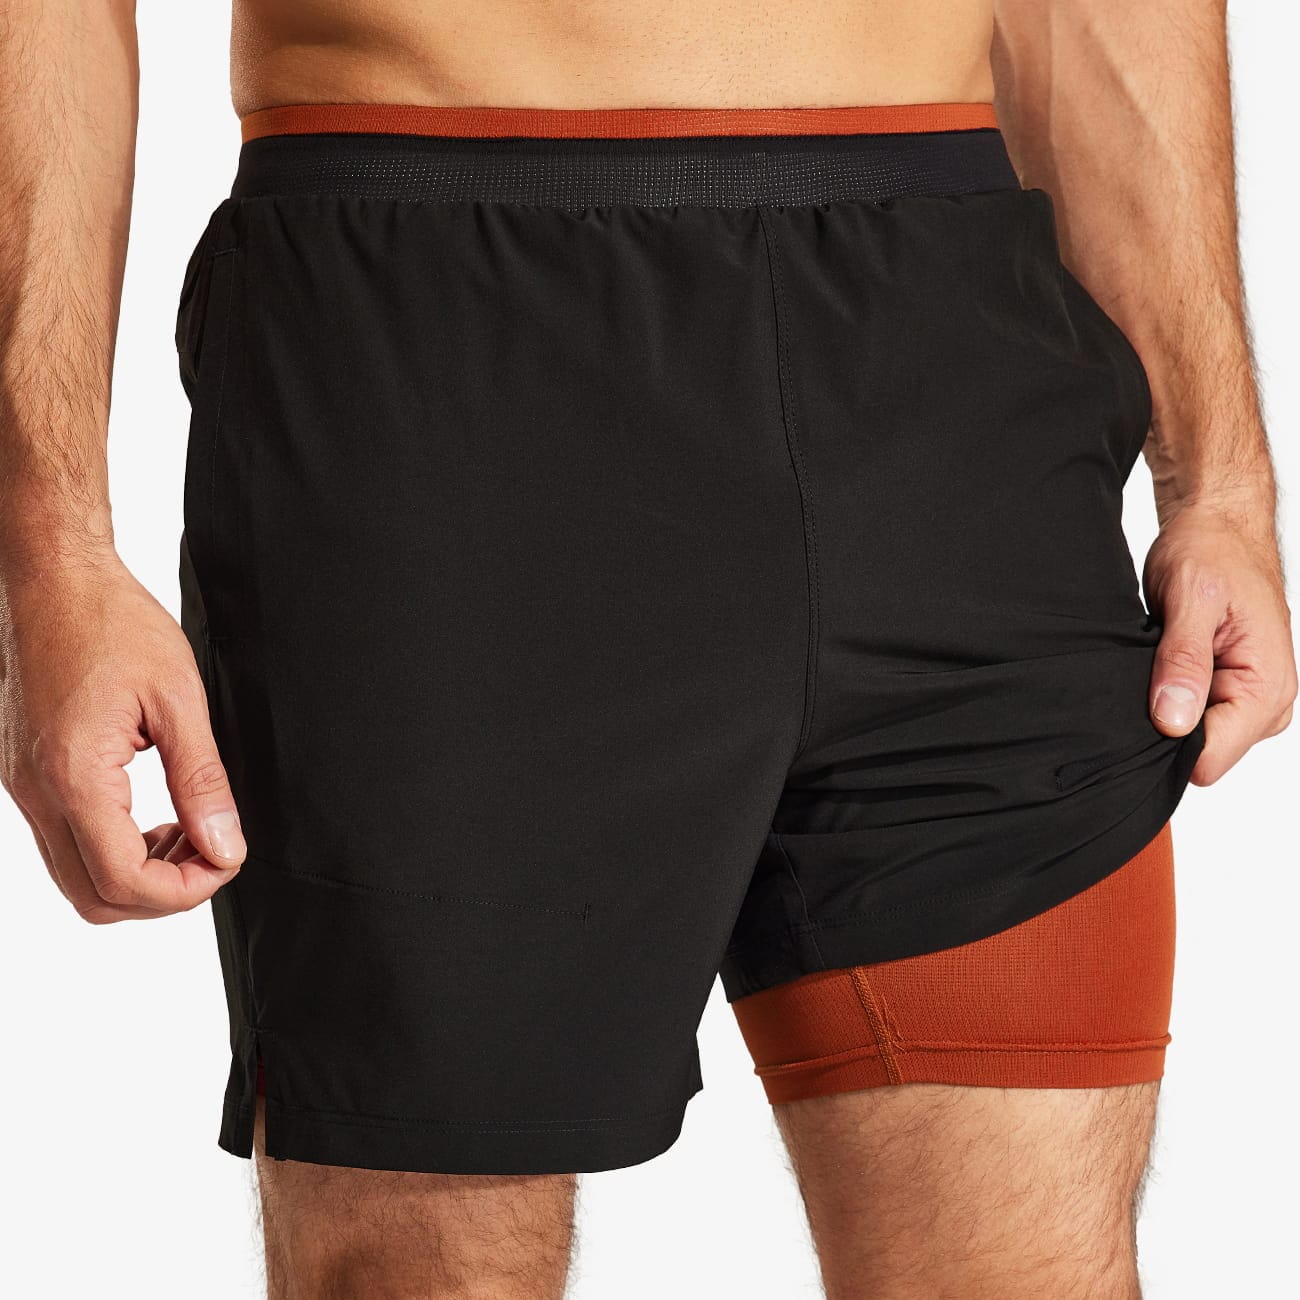 Men's 2 in 1 Running Shorts with Liner 5" Quick Dry Athletic Shorts Men's Shorts Black Orange / S MIER